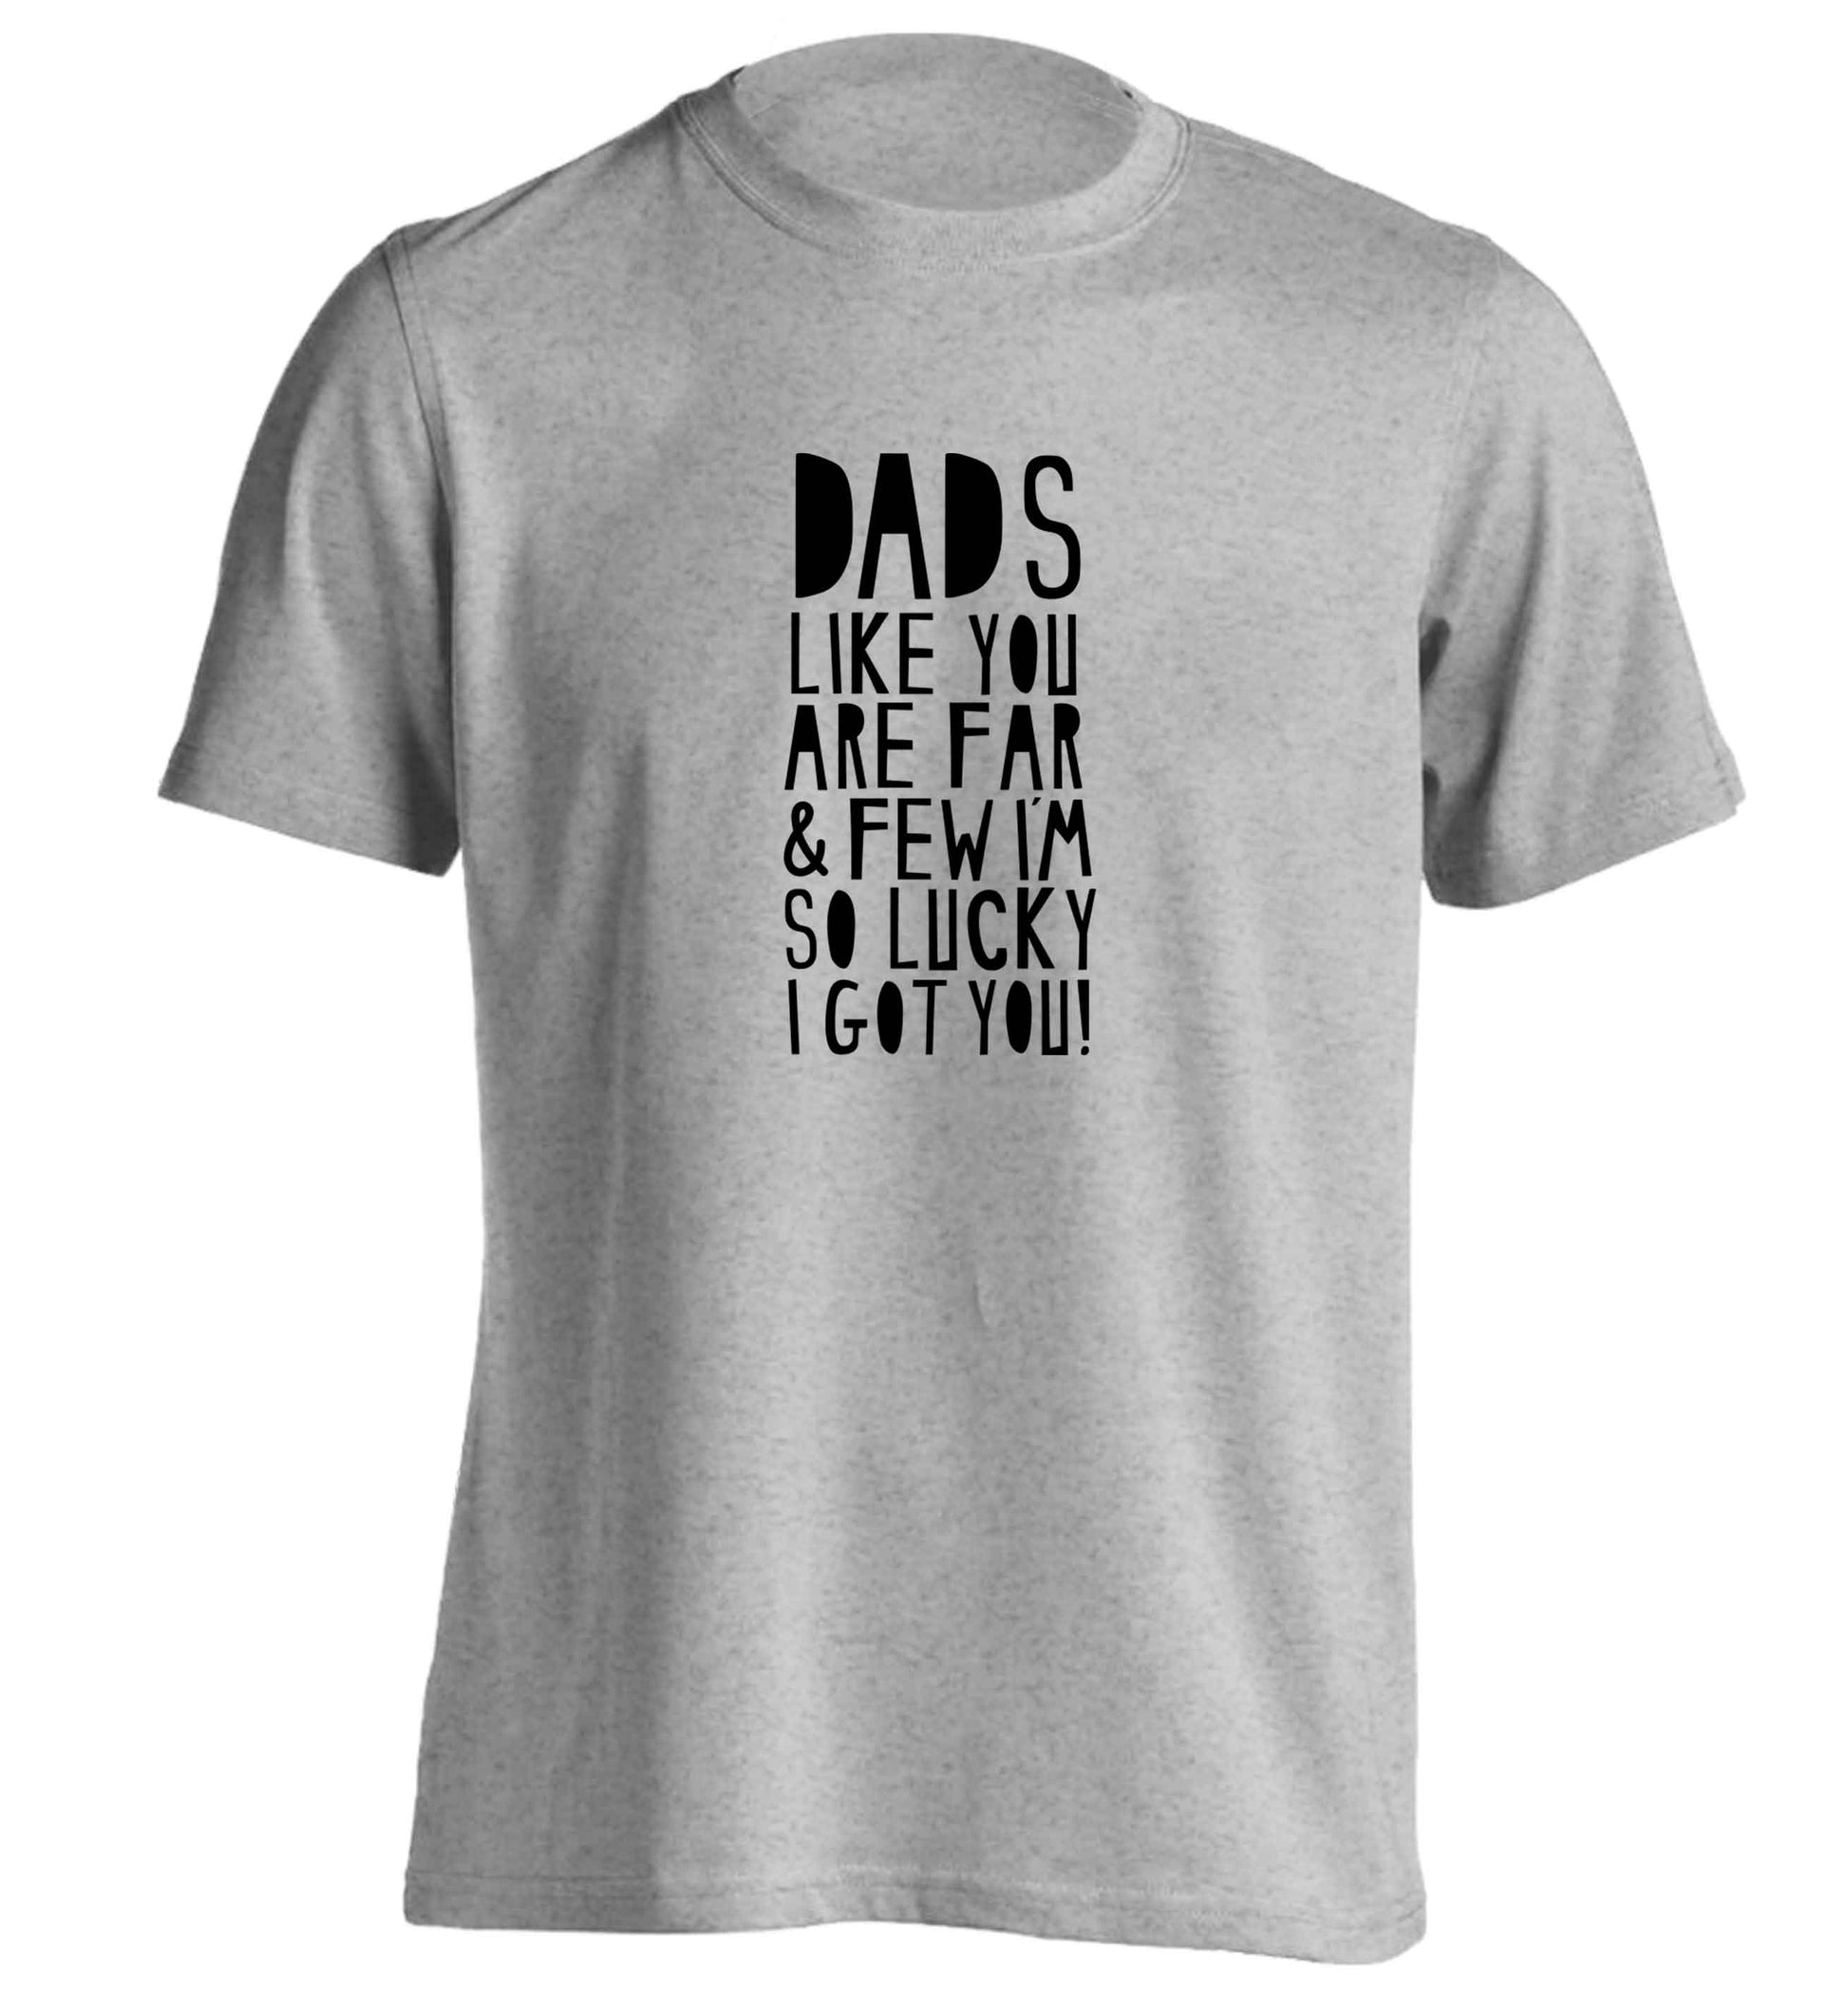 Dads like you are far and few I'm so luck I got you! adults unisex grey Tshirt 2XL